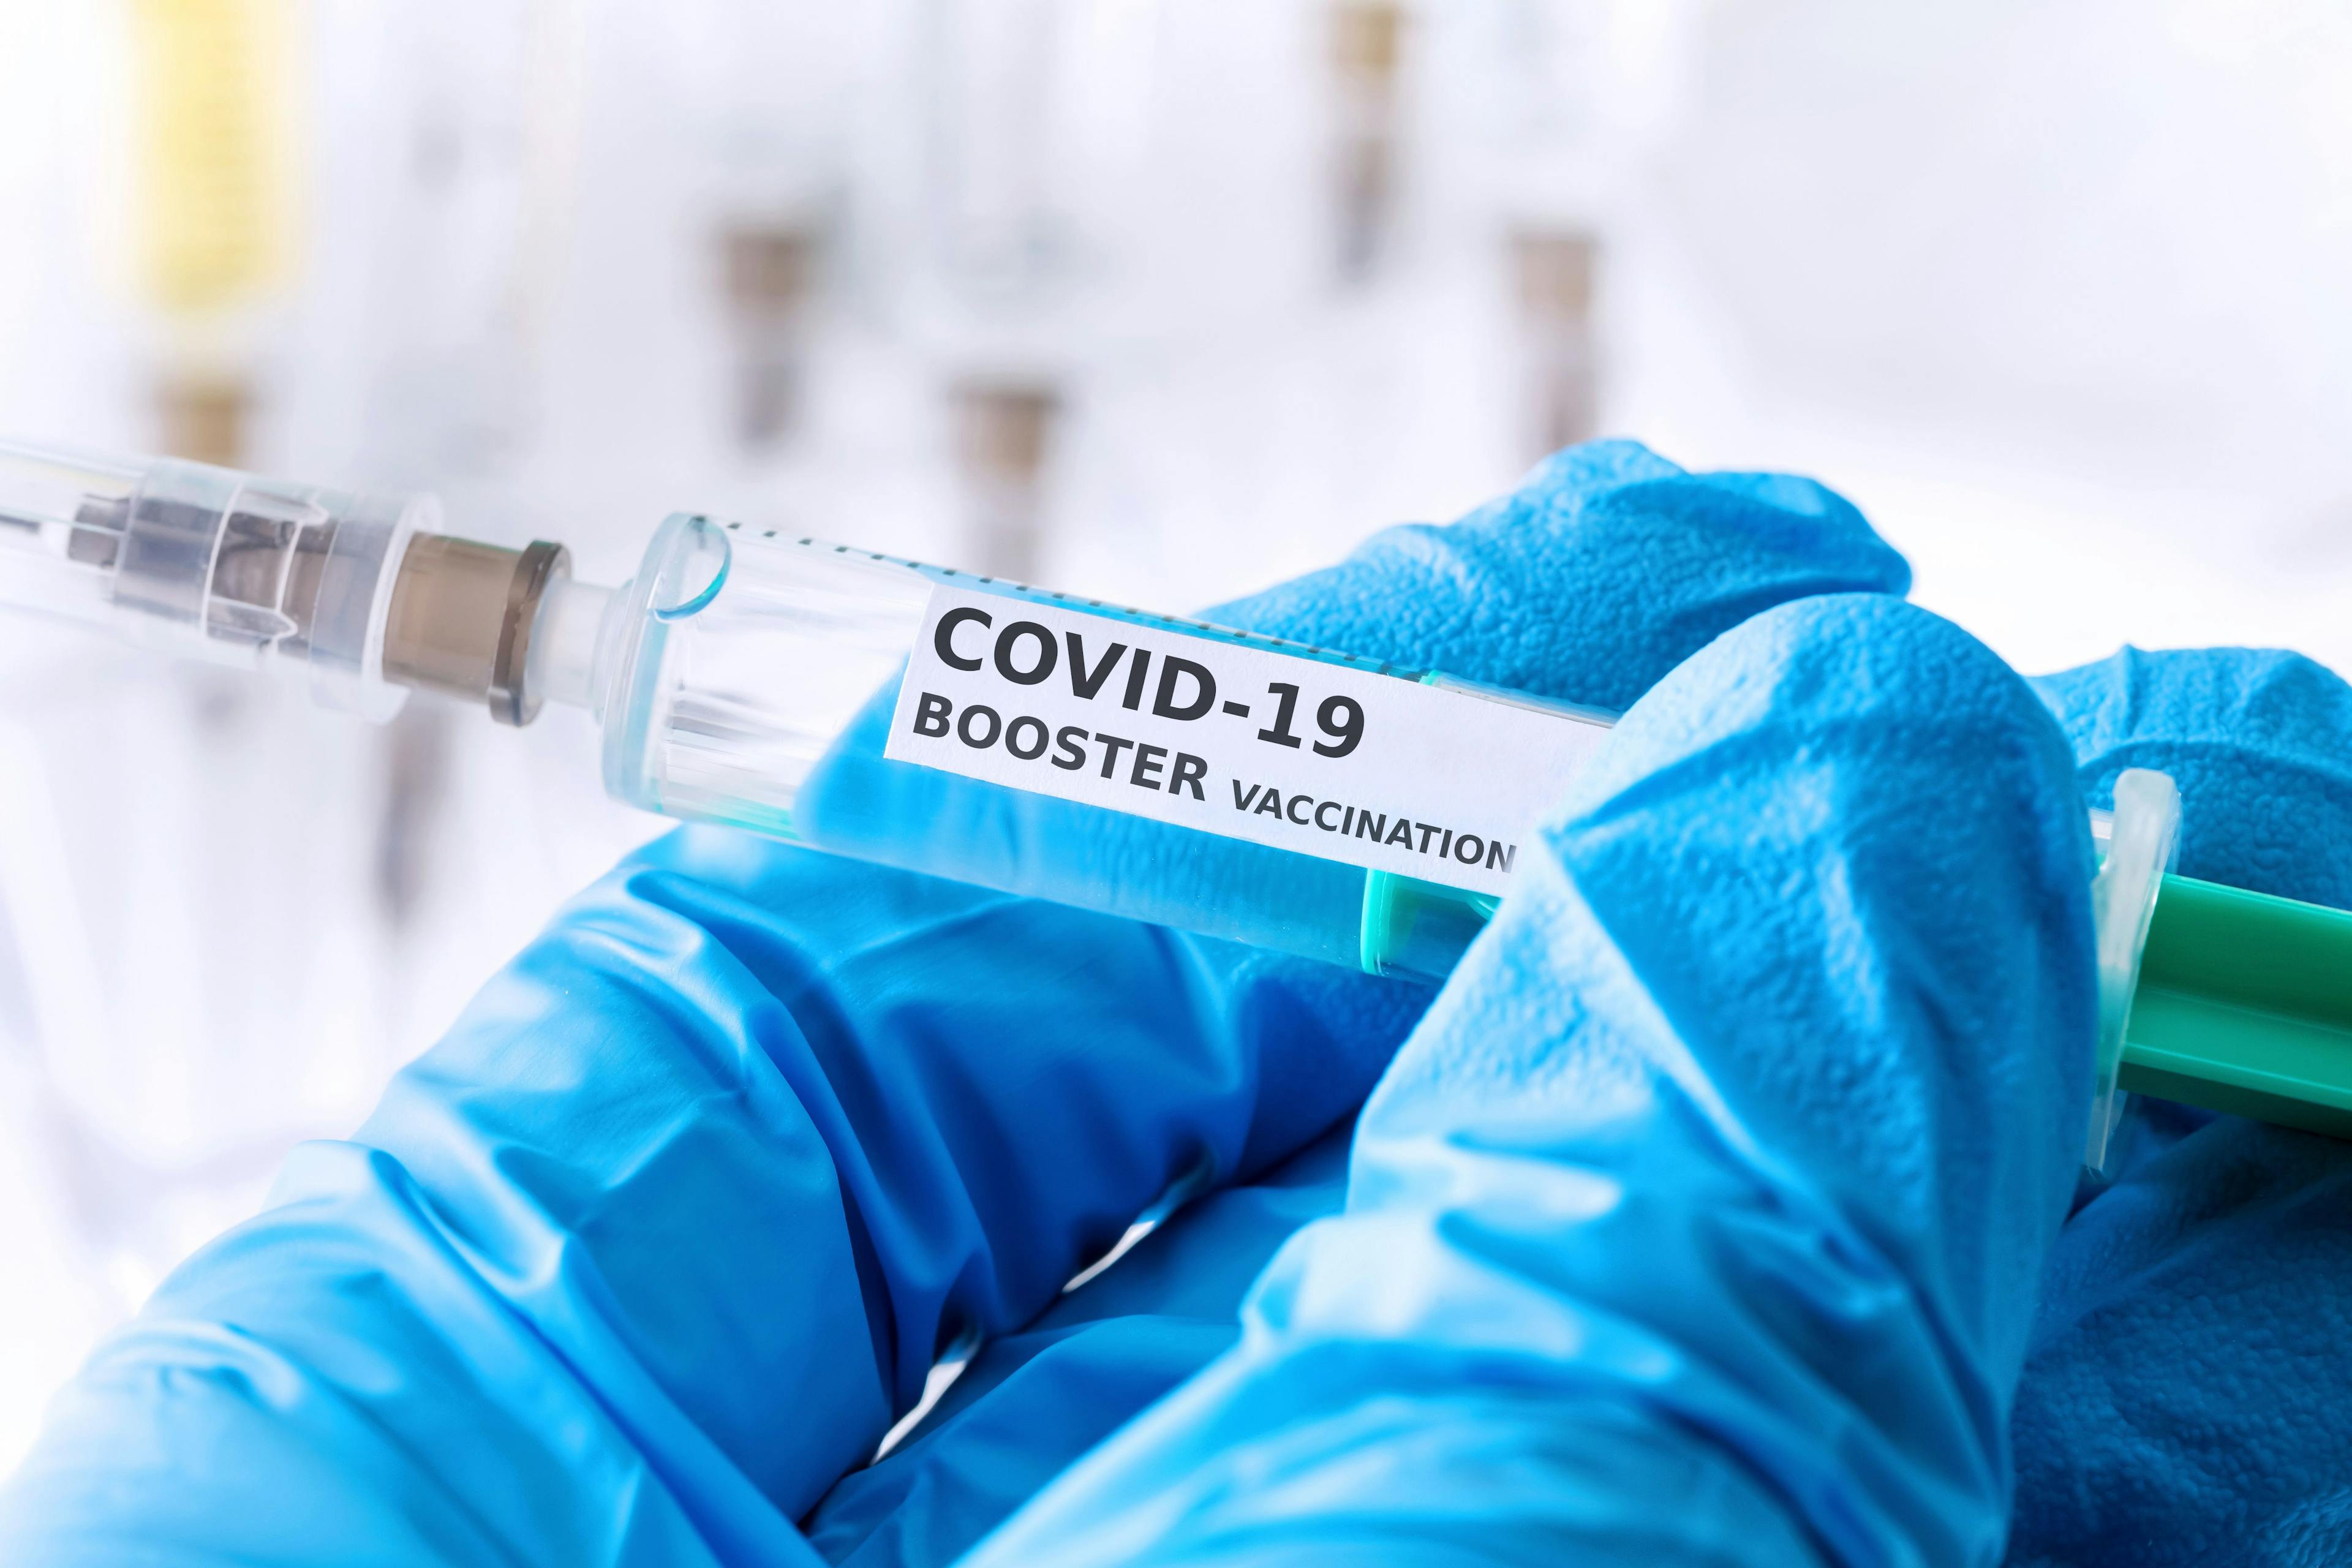 AMA publishes new codes for updated COVID-19 vaccines, boosters